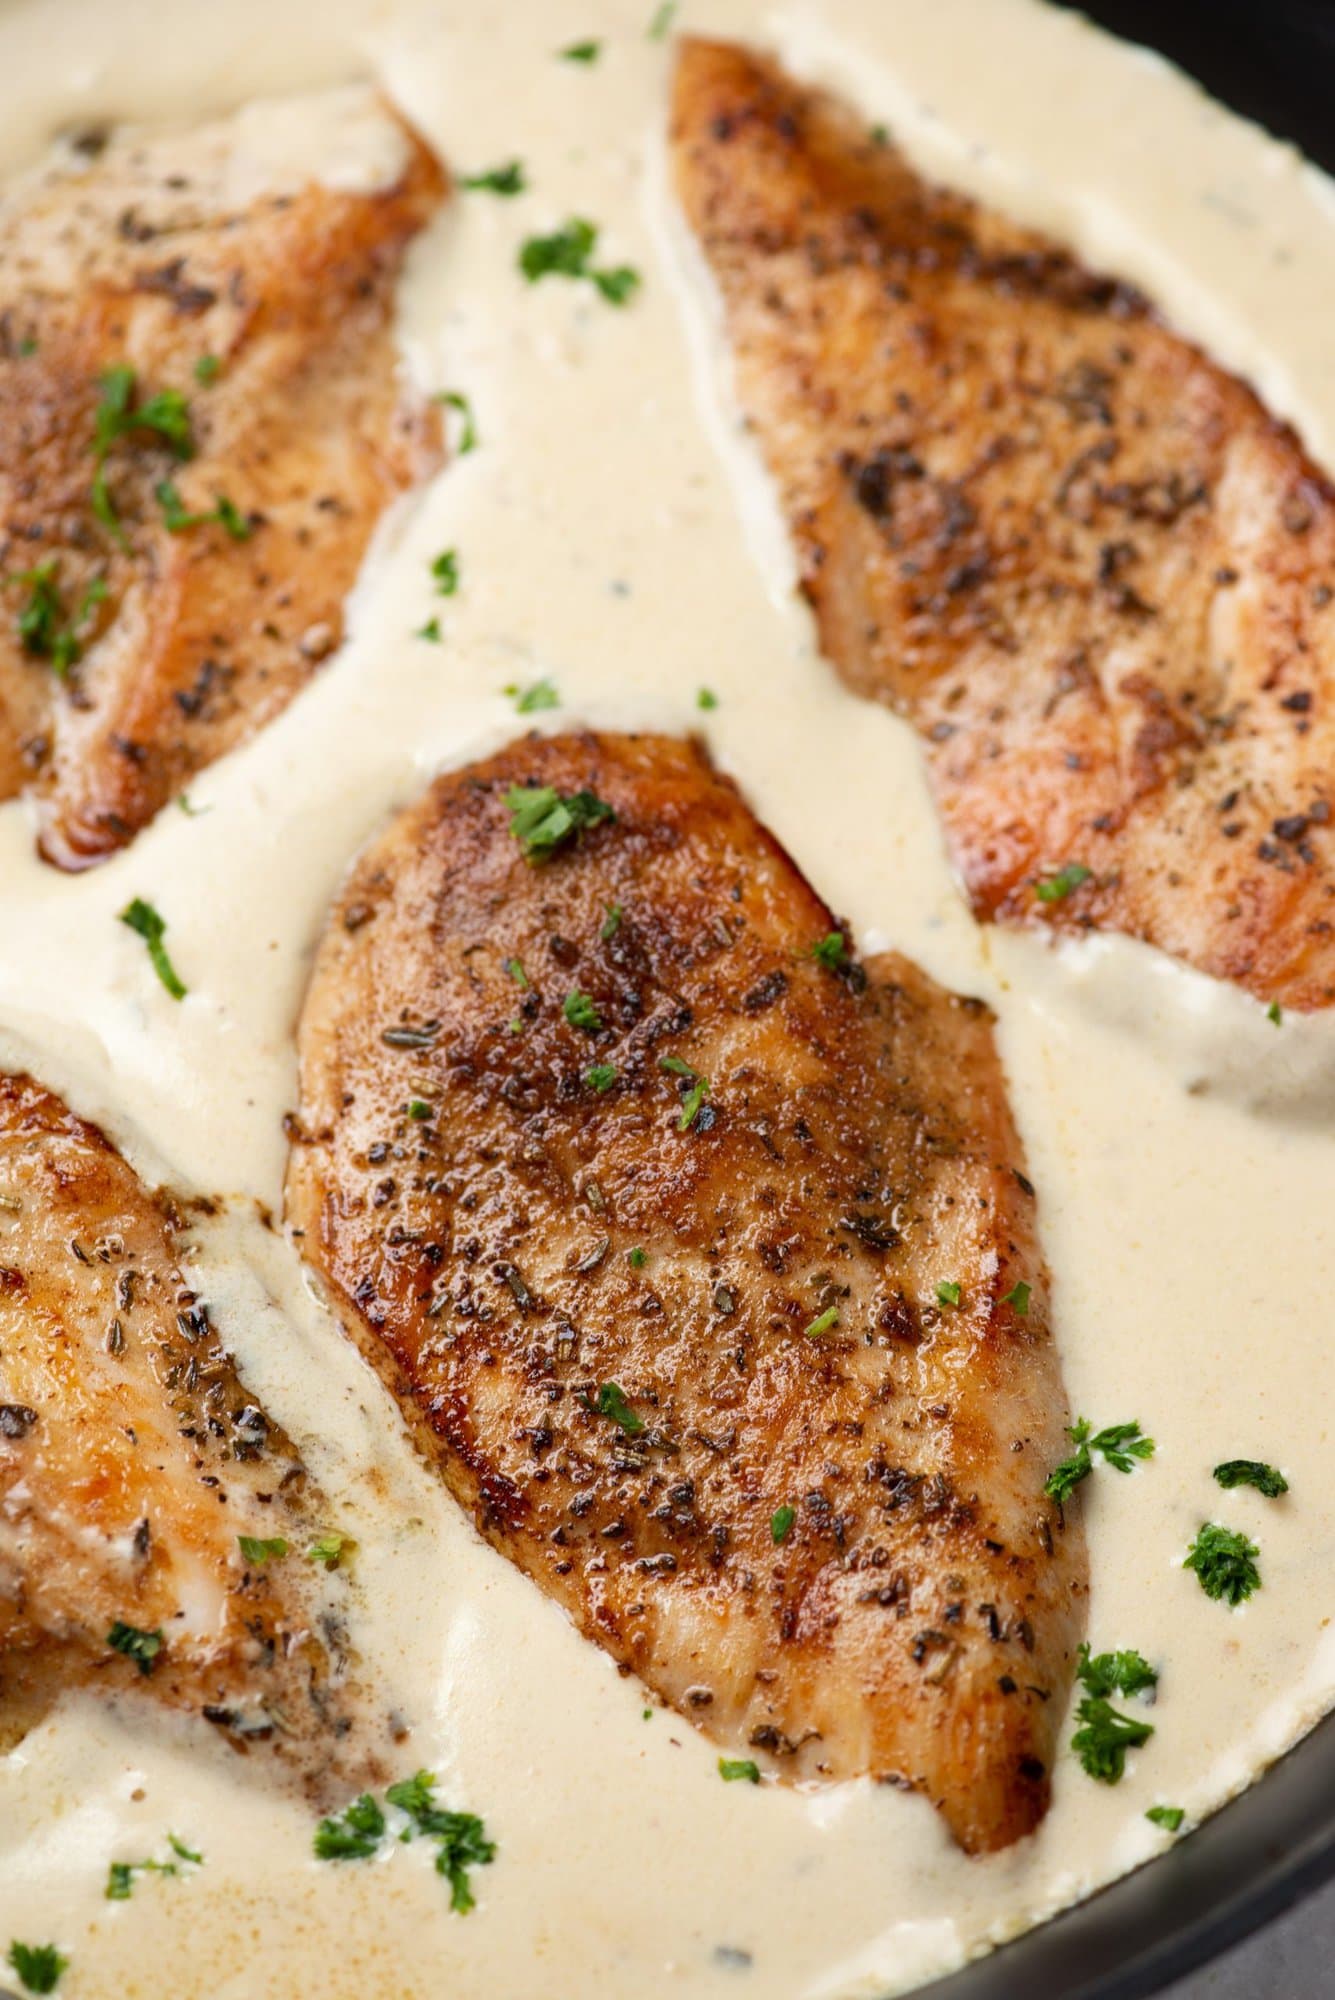 Juicy, tender, and perfectly seasoned chicken breast in a creamy garlic parmesan sauce. This one-pan chicken recipe takes less than 30 minutes to make and fits well on your weekday dinner menu.  